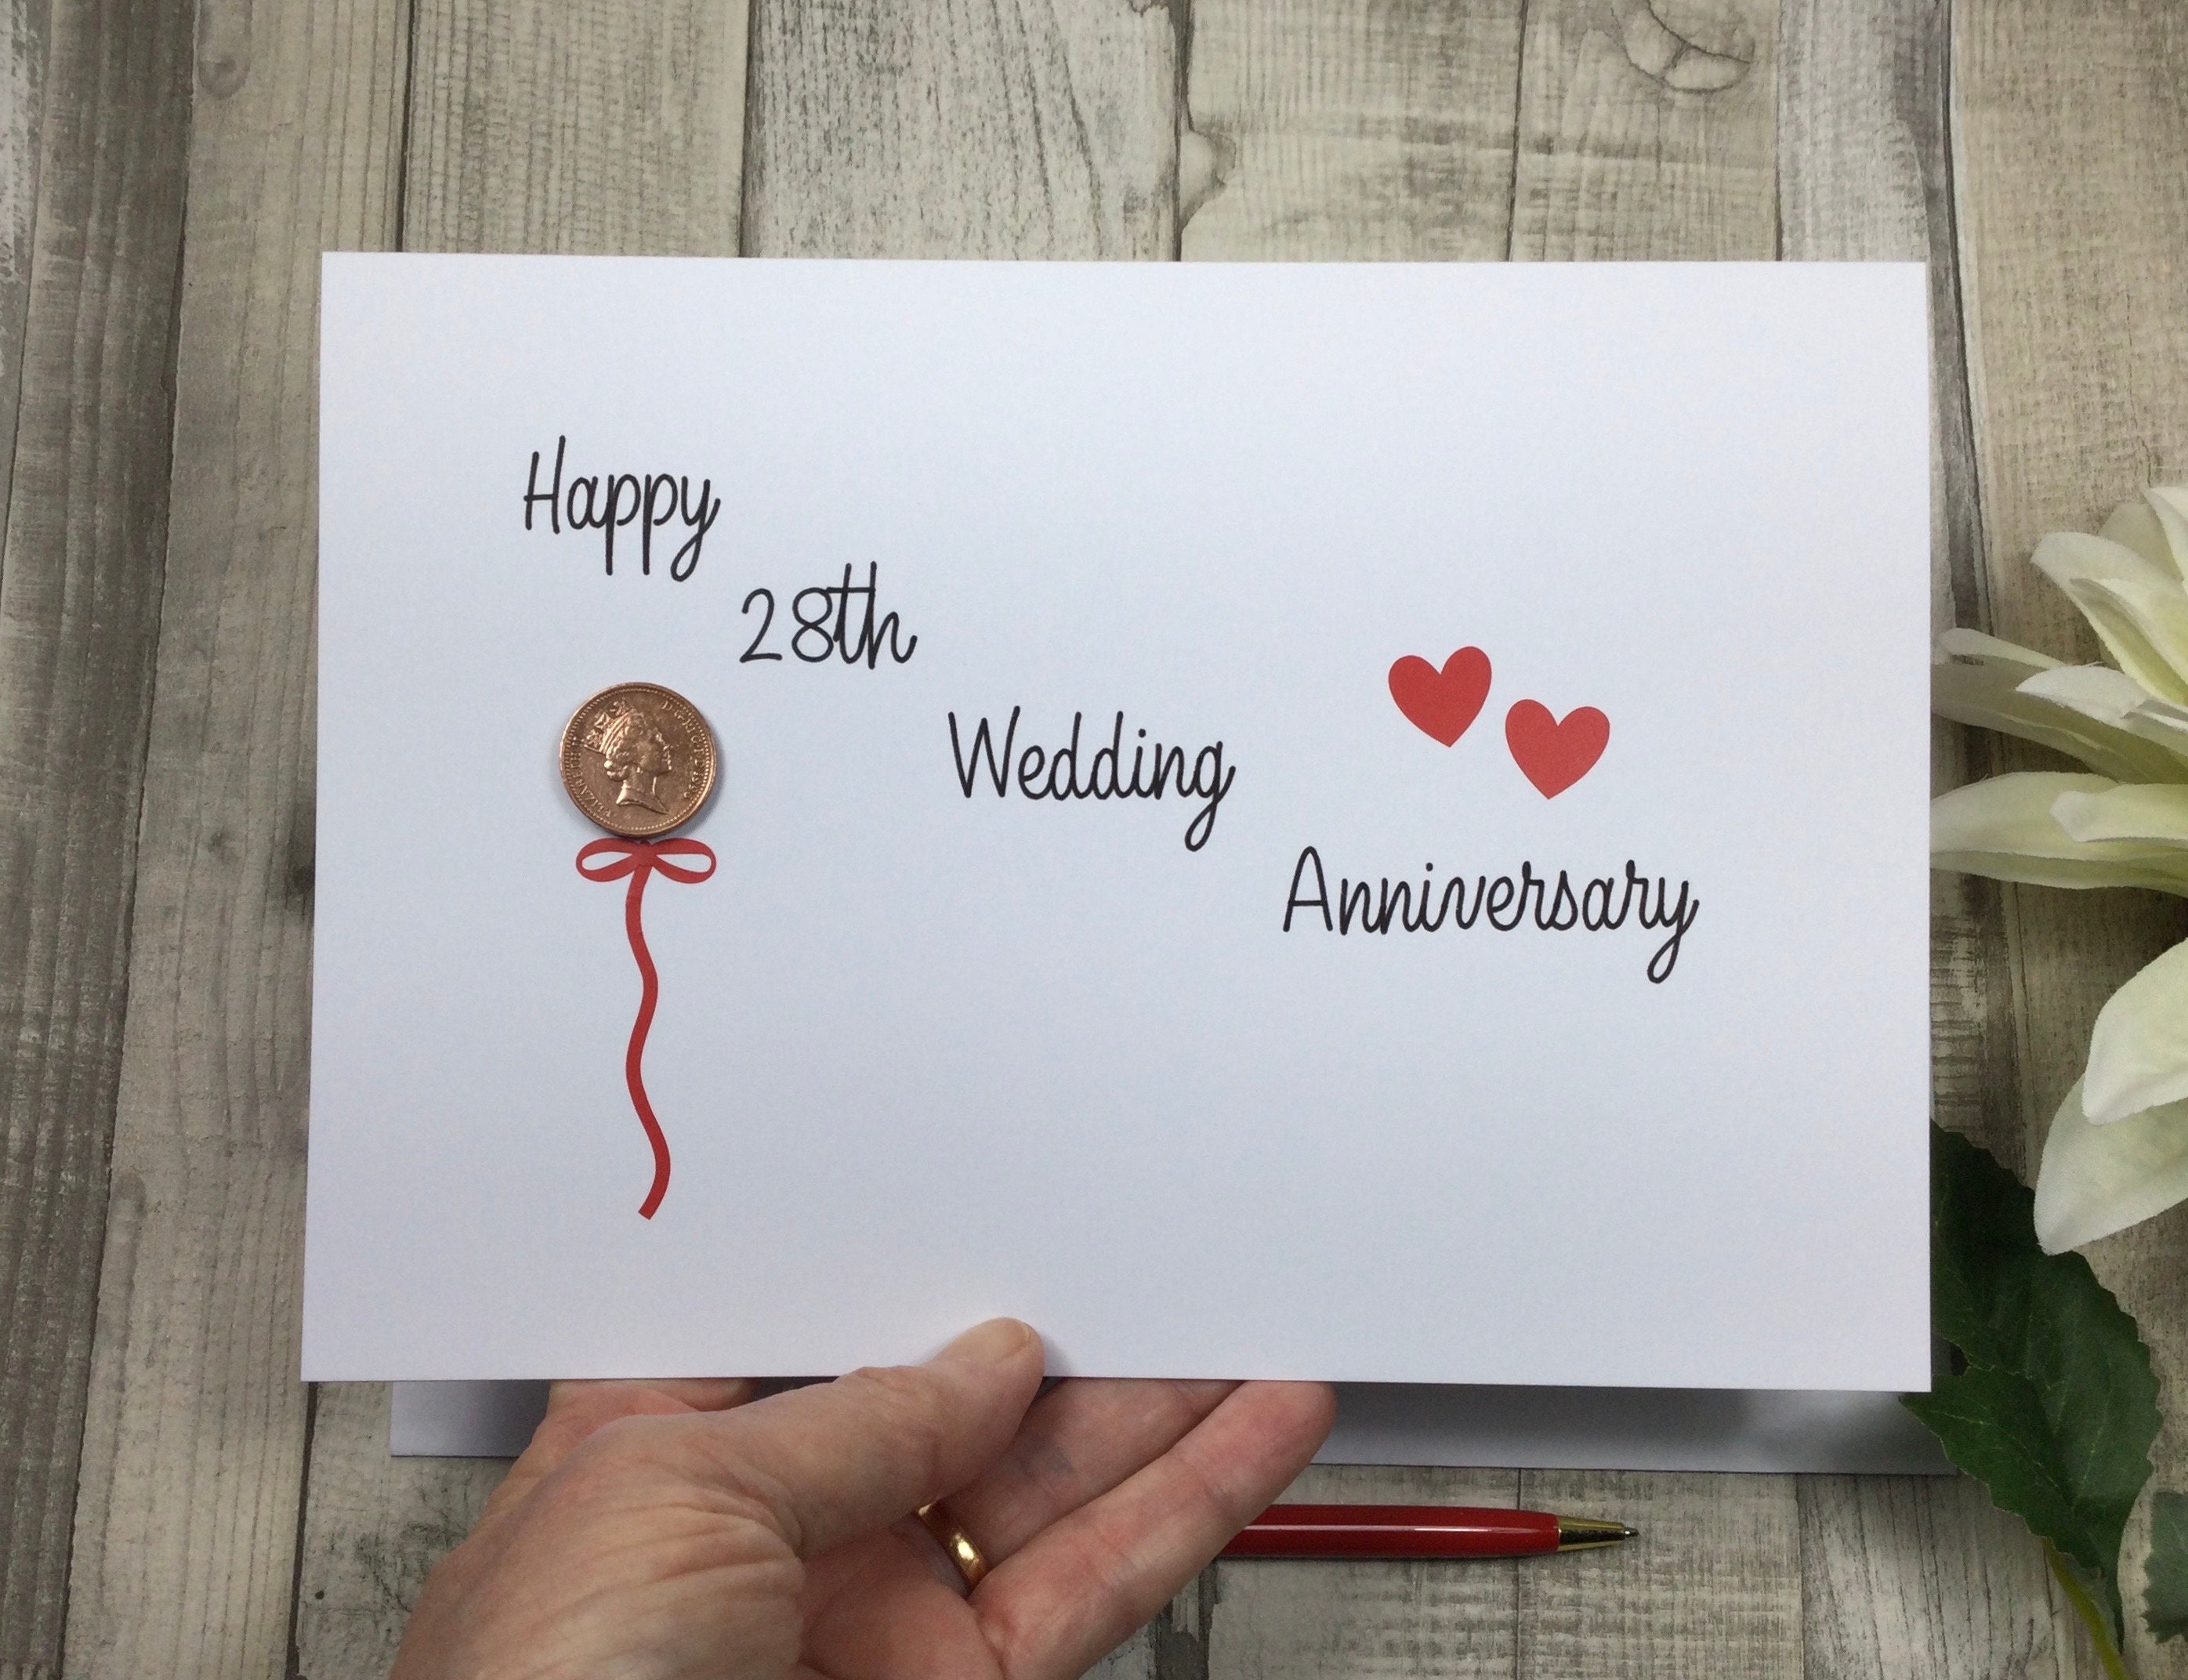 28 Ideas for Happy Anniversary Messages — Mixbook Inspiration